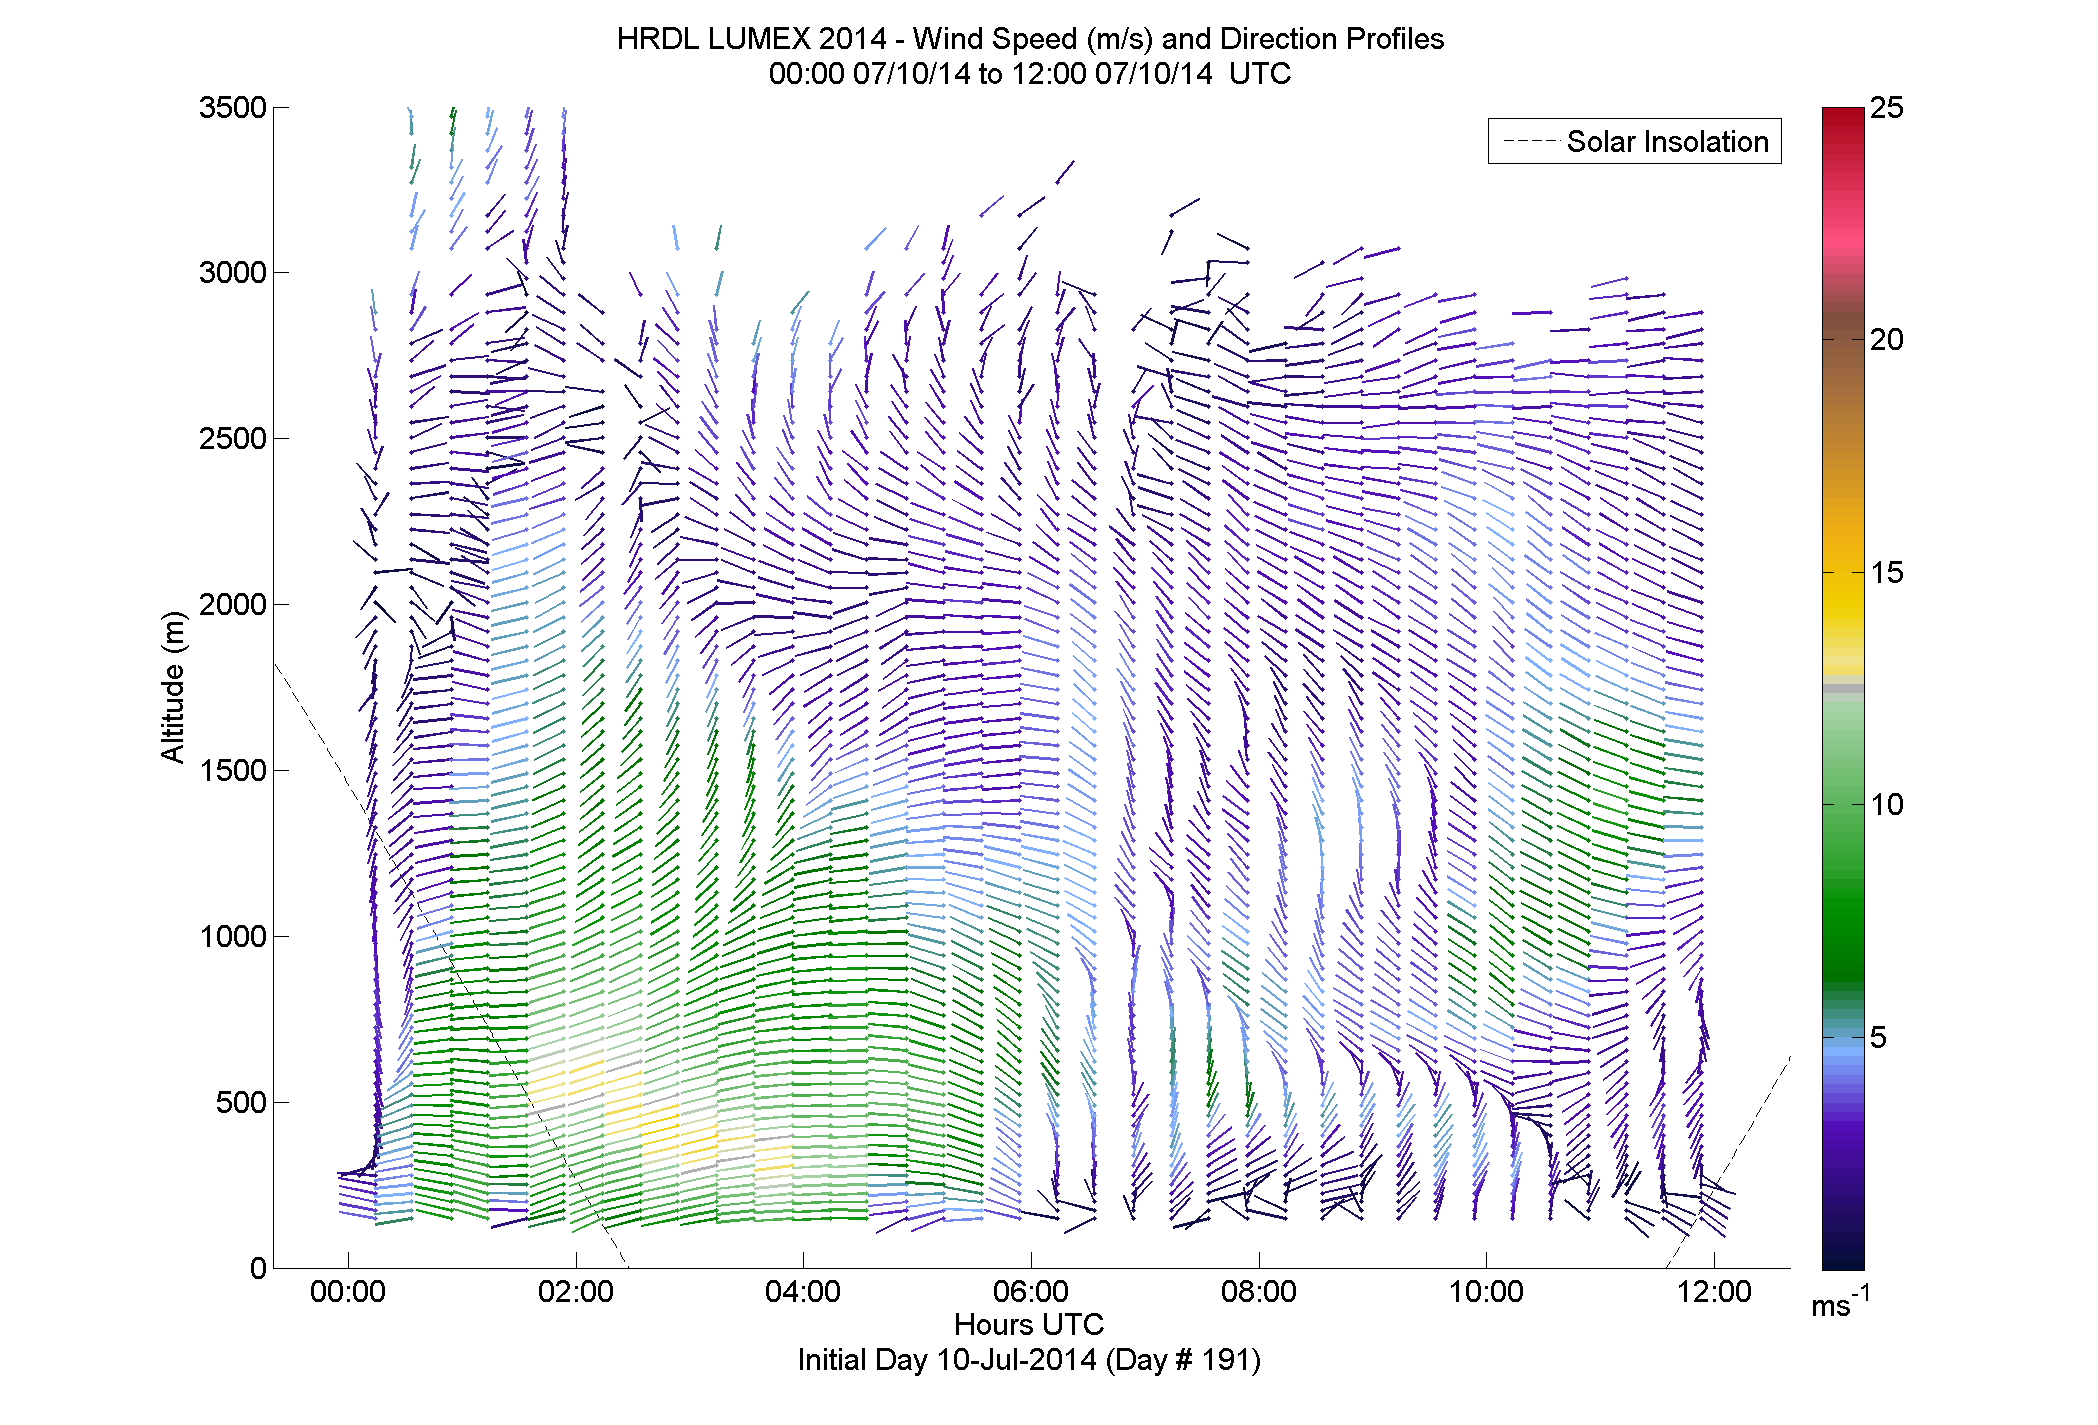 HRDL speed and direction profile - July 10 am